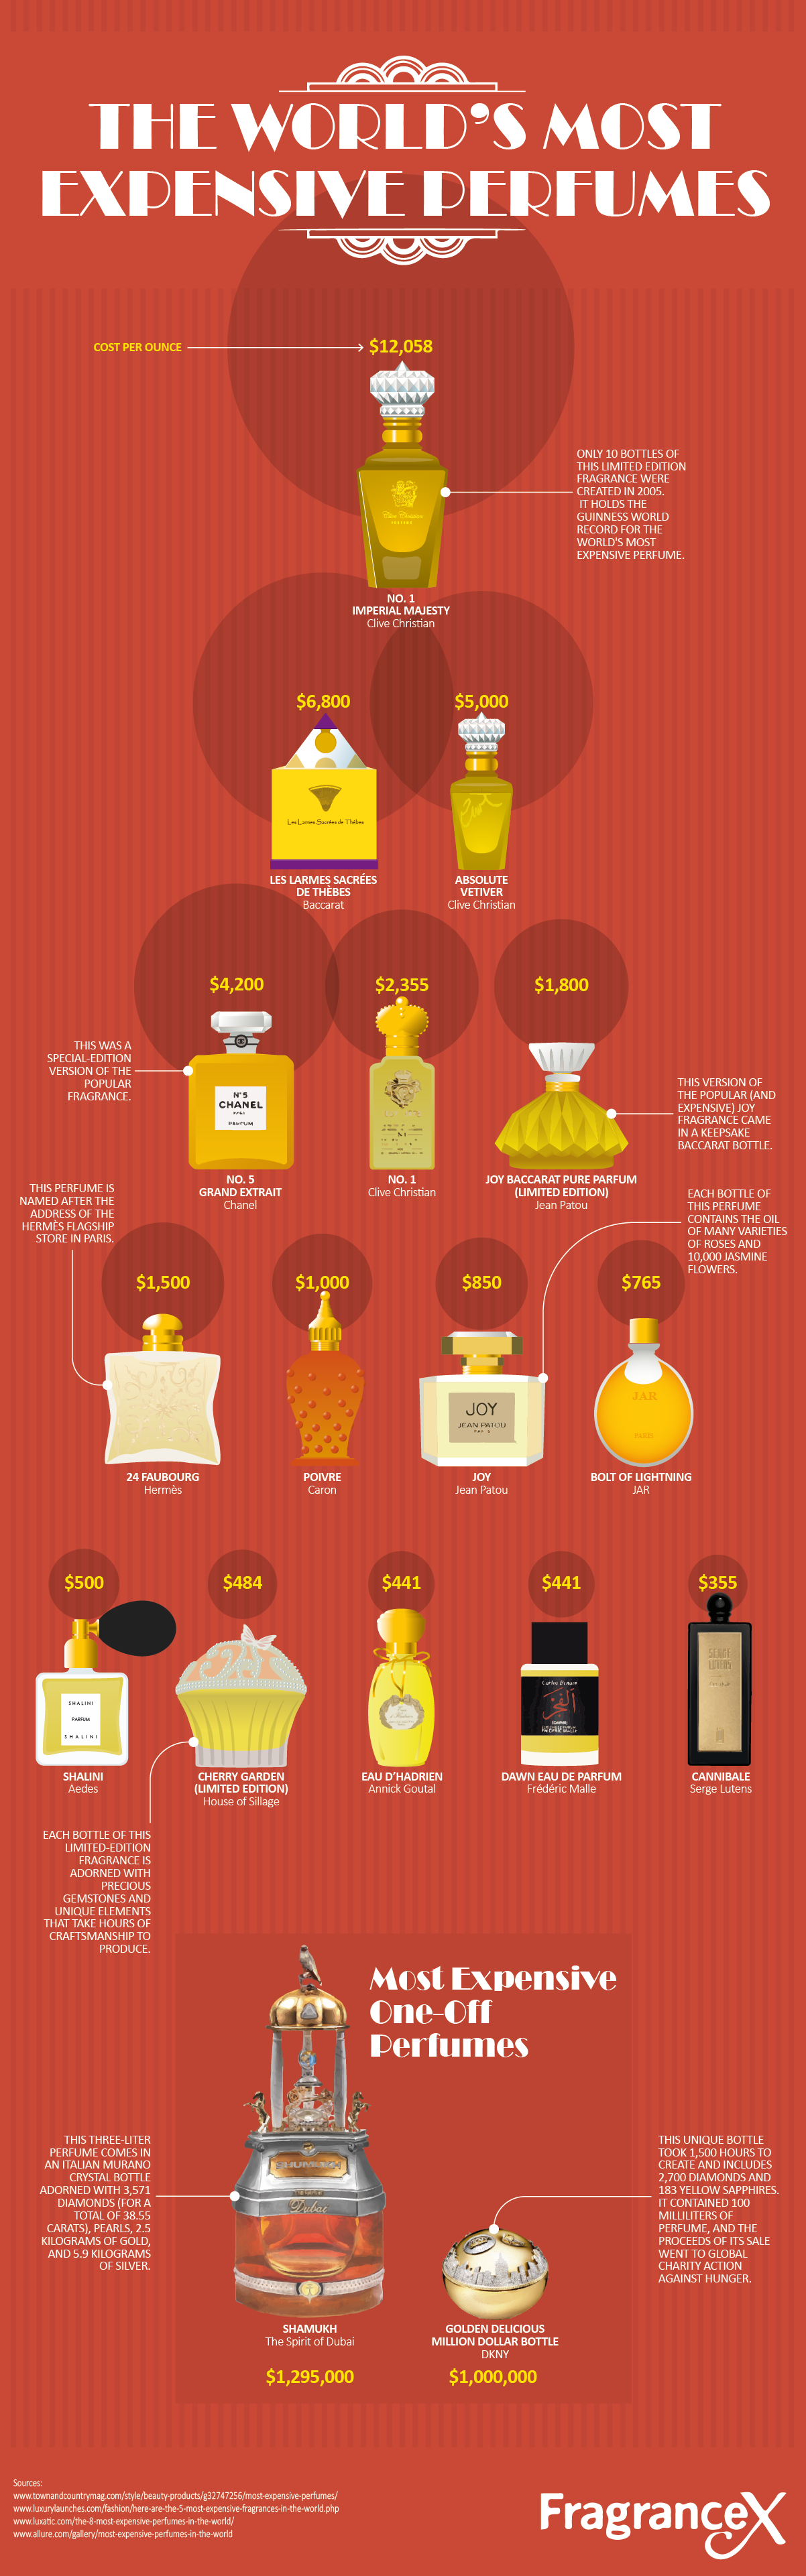 5 Of The Most Expensive Perfumes In The World